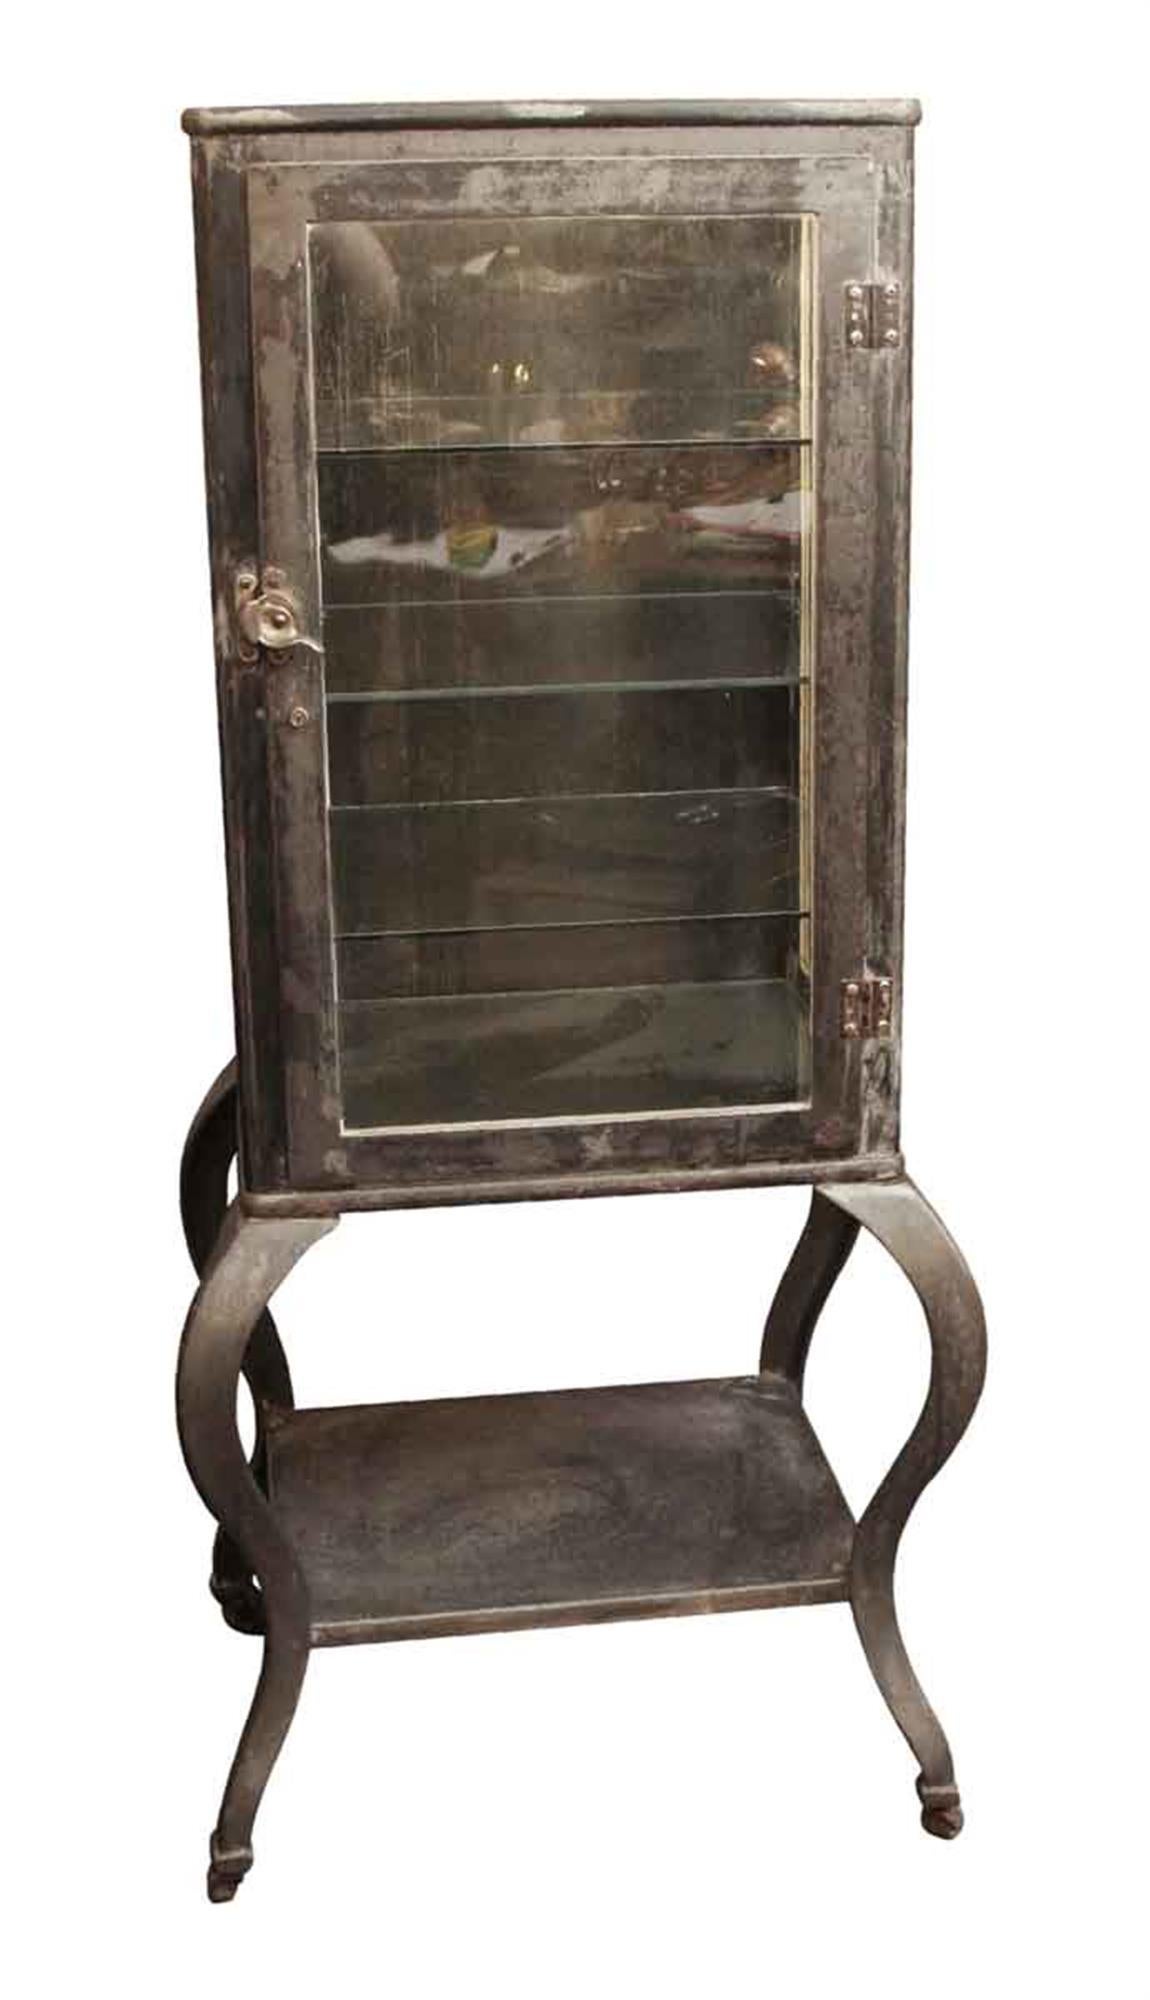 Highly sought after 1930s antique American made cold rolled and cast steel medical supply cabinet with cabriole legs. There are three sides of glass and three glass shelves. This has been stripped and lacquered. Great for display or for bath or